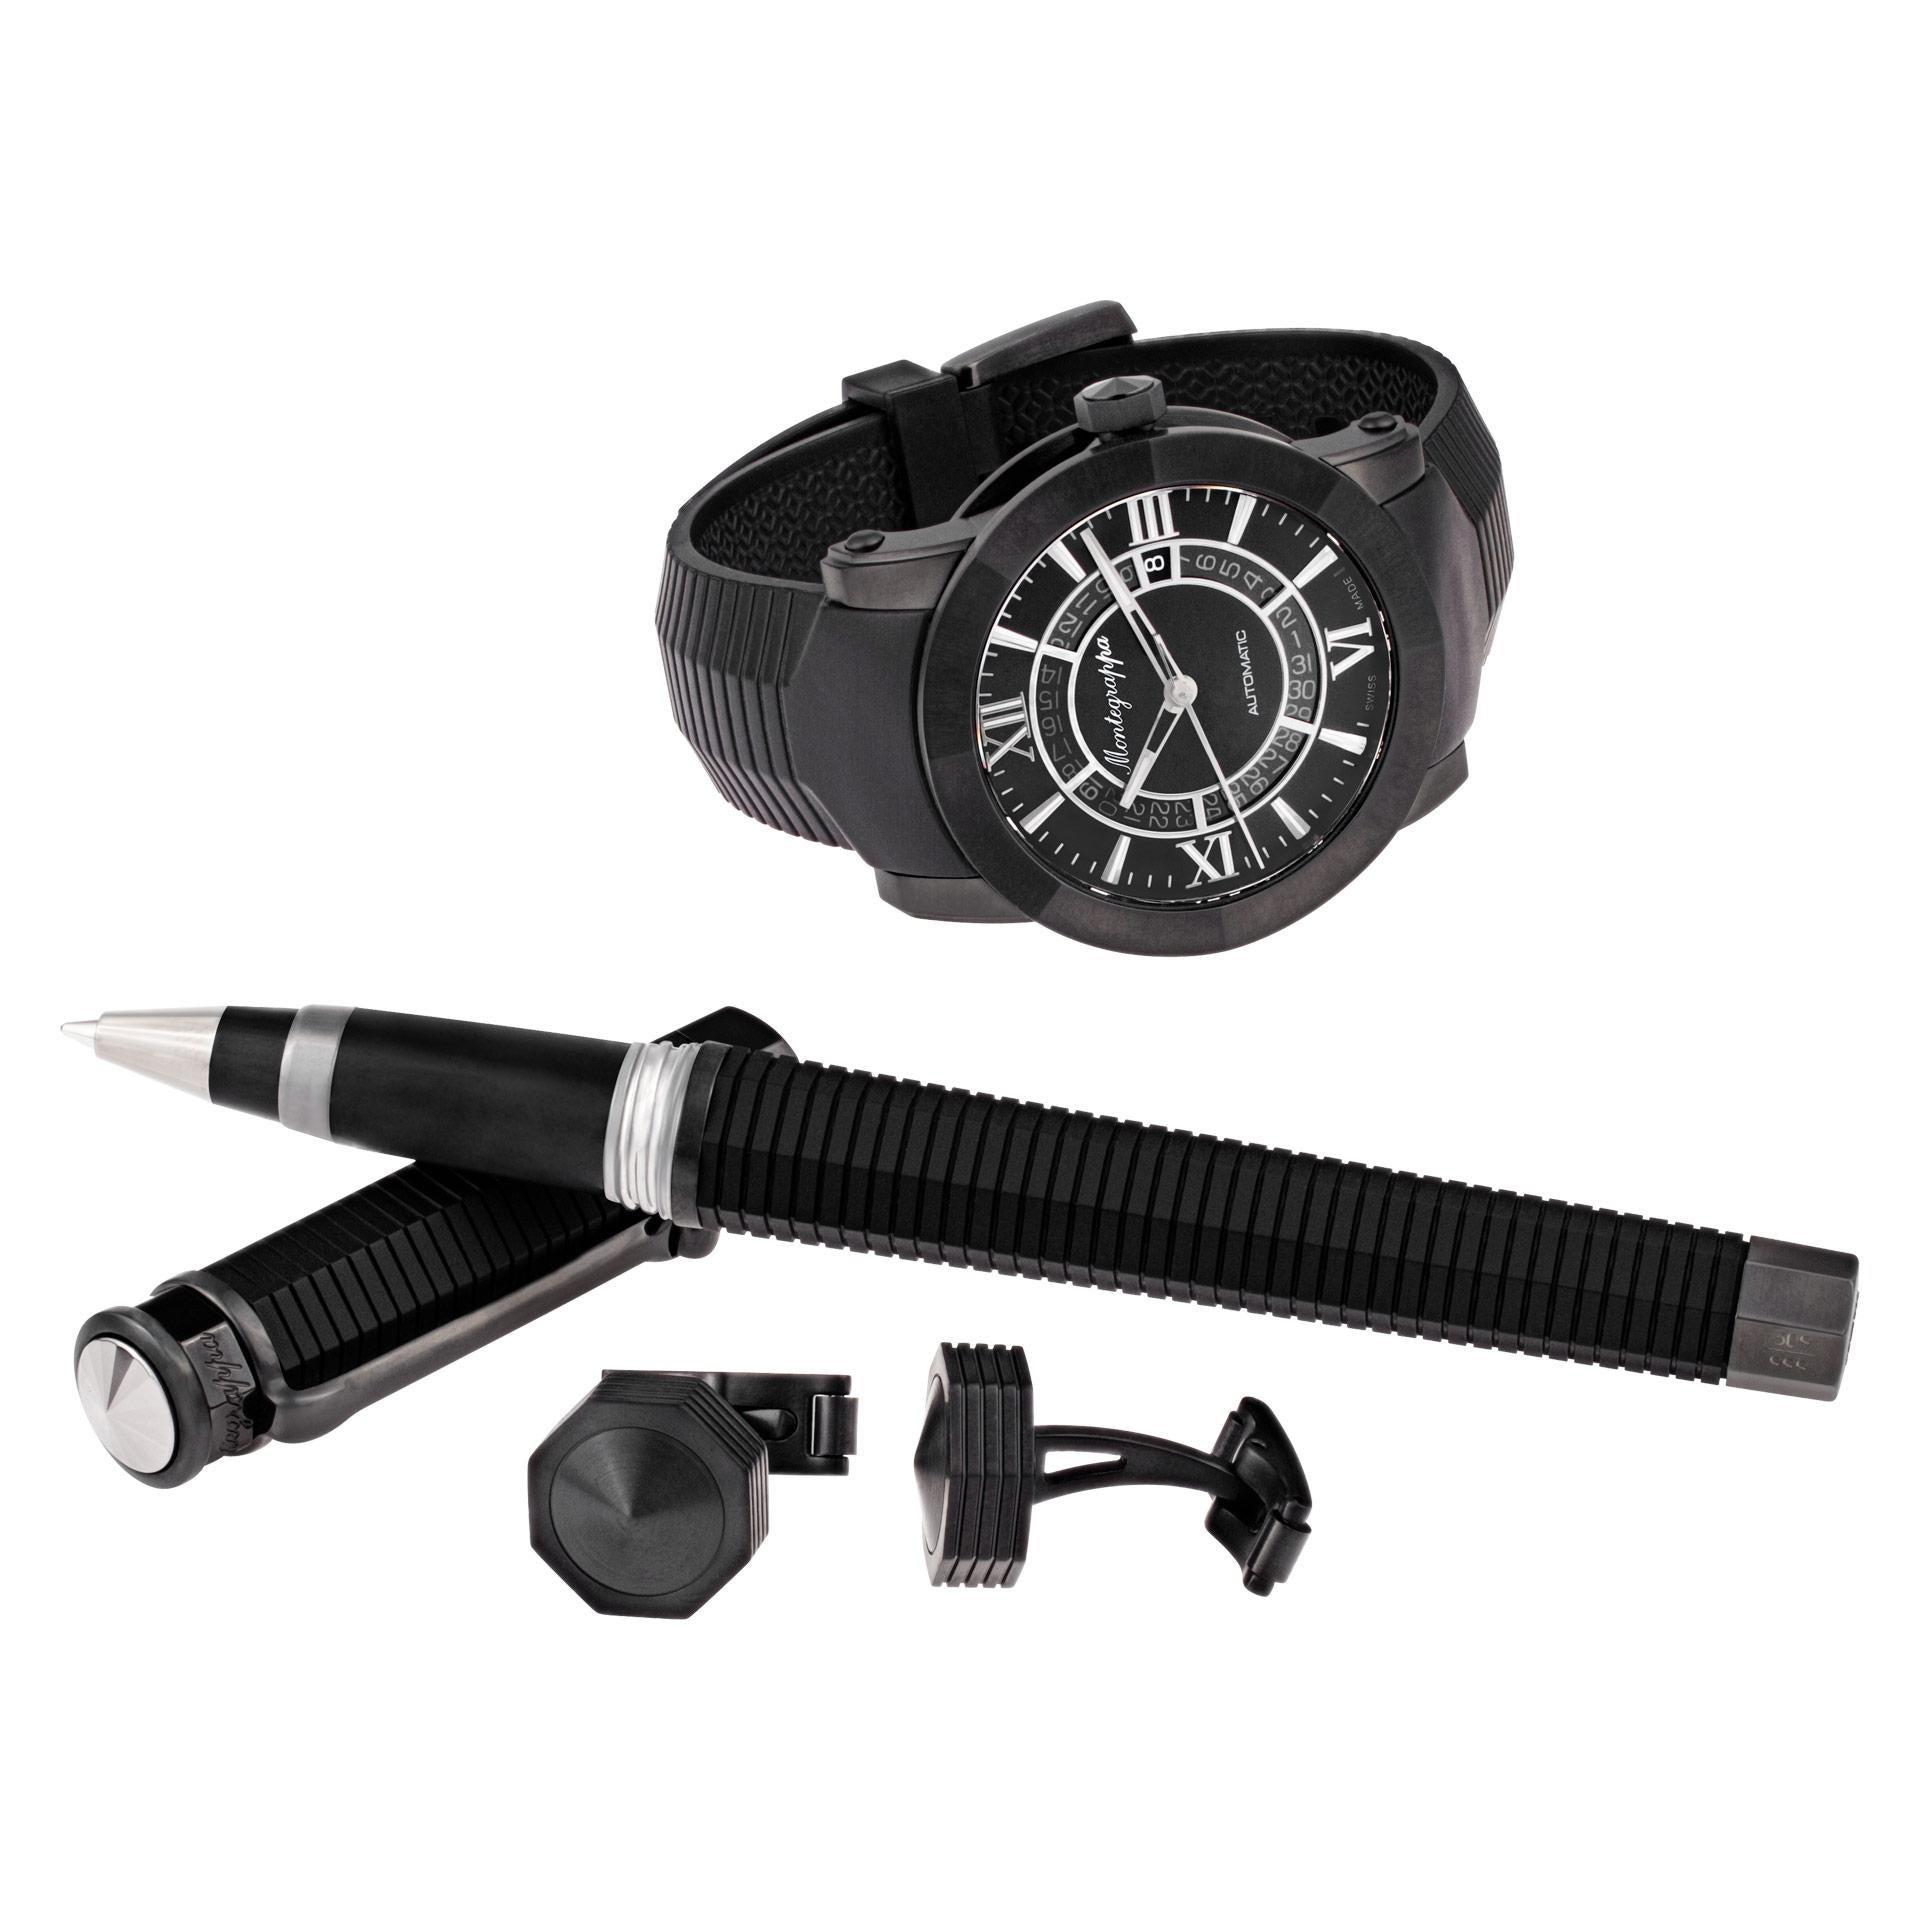 Brand new Montegrappa Nero Uno All-Black set with watch, pen, and cufflinks. Skeleton Date watch with ETA automatic movement under glass. Limited edition set 280/999 Fine Pre-owned Montegrappa Watch.   Certified preowned Montegrappa Skeleton Date